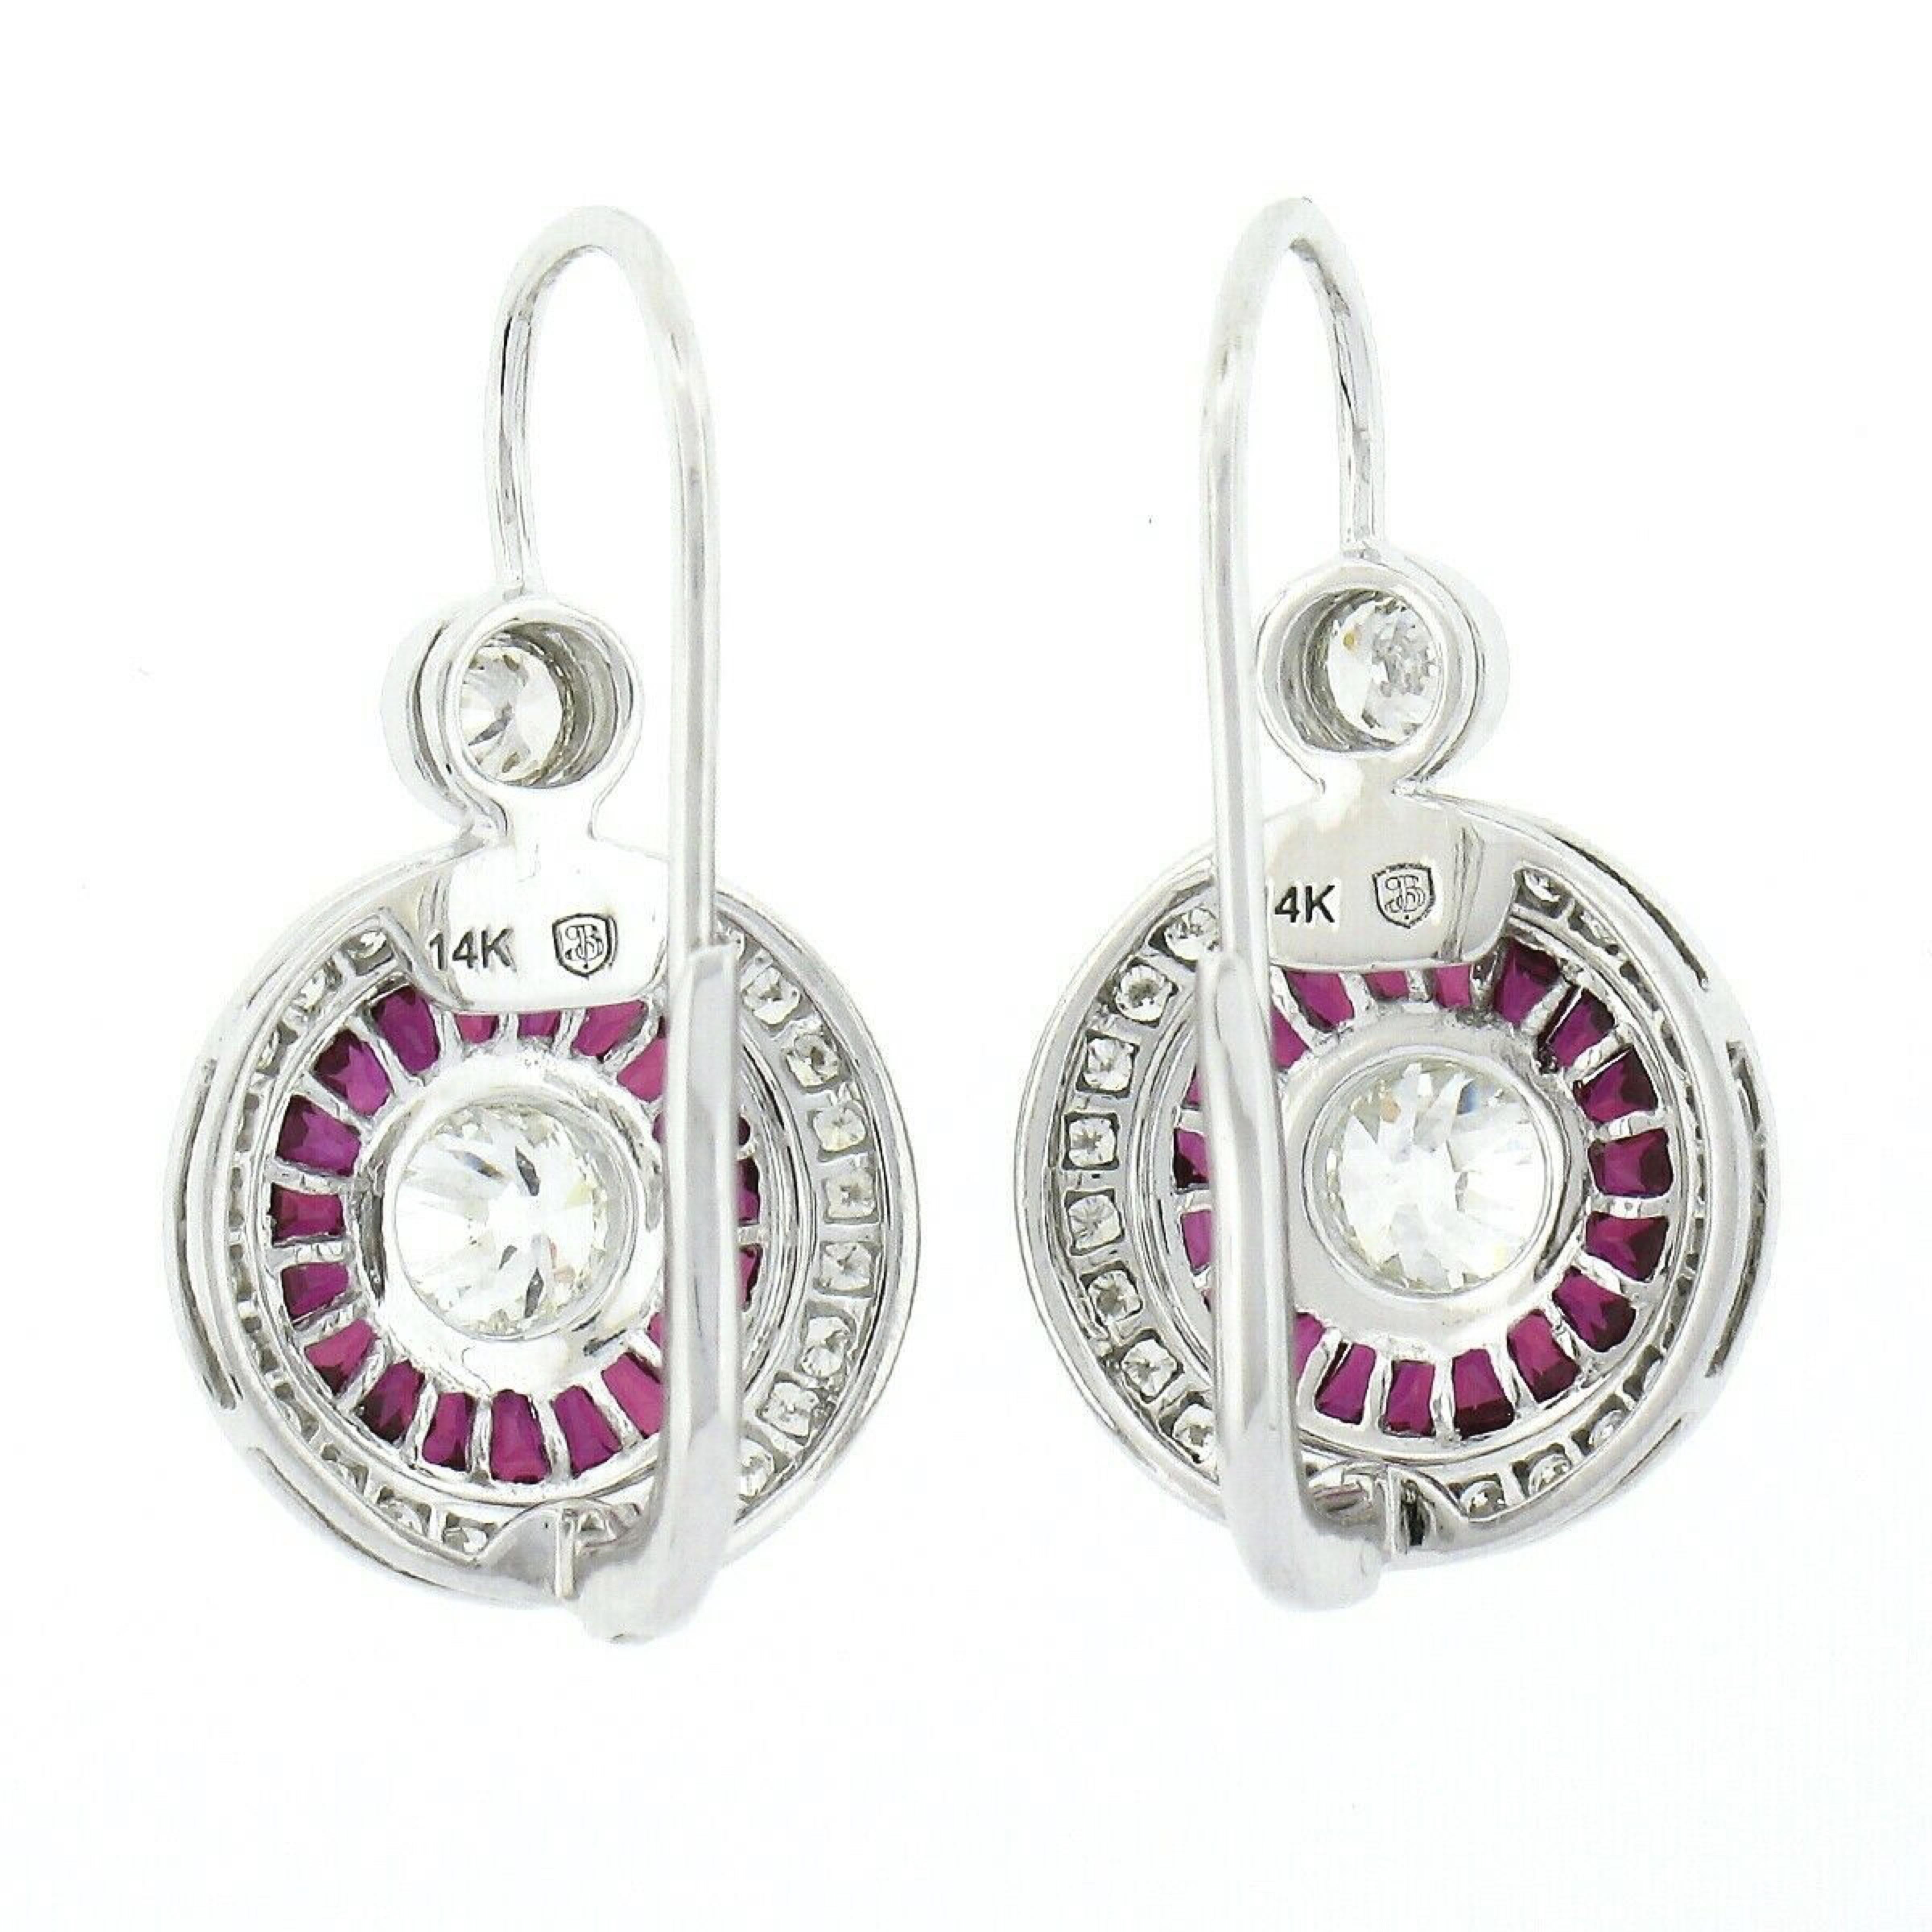 New 14k White Gold 3.62ct European Bezel Diamond Calibre Ruby Halo Drop Earrings In New Condition For Sale In Montclair, NJ